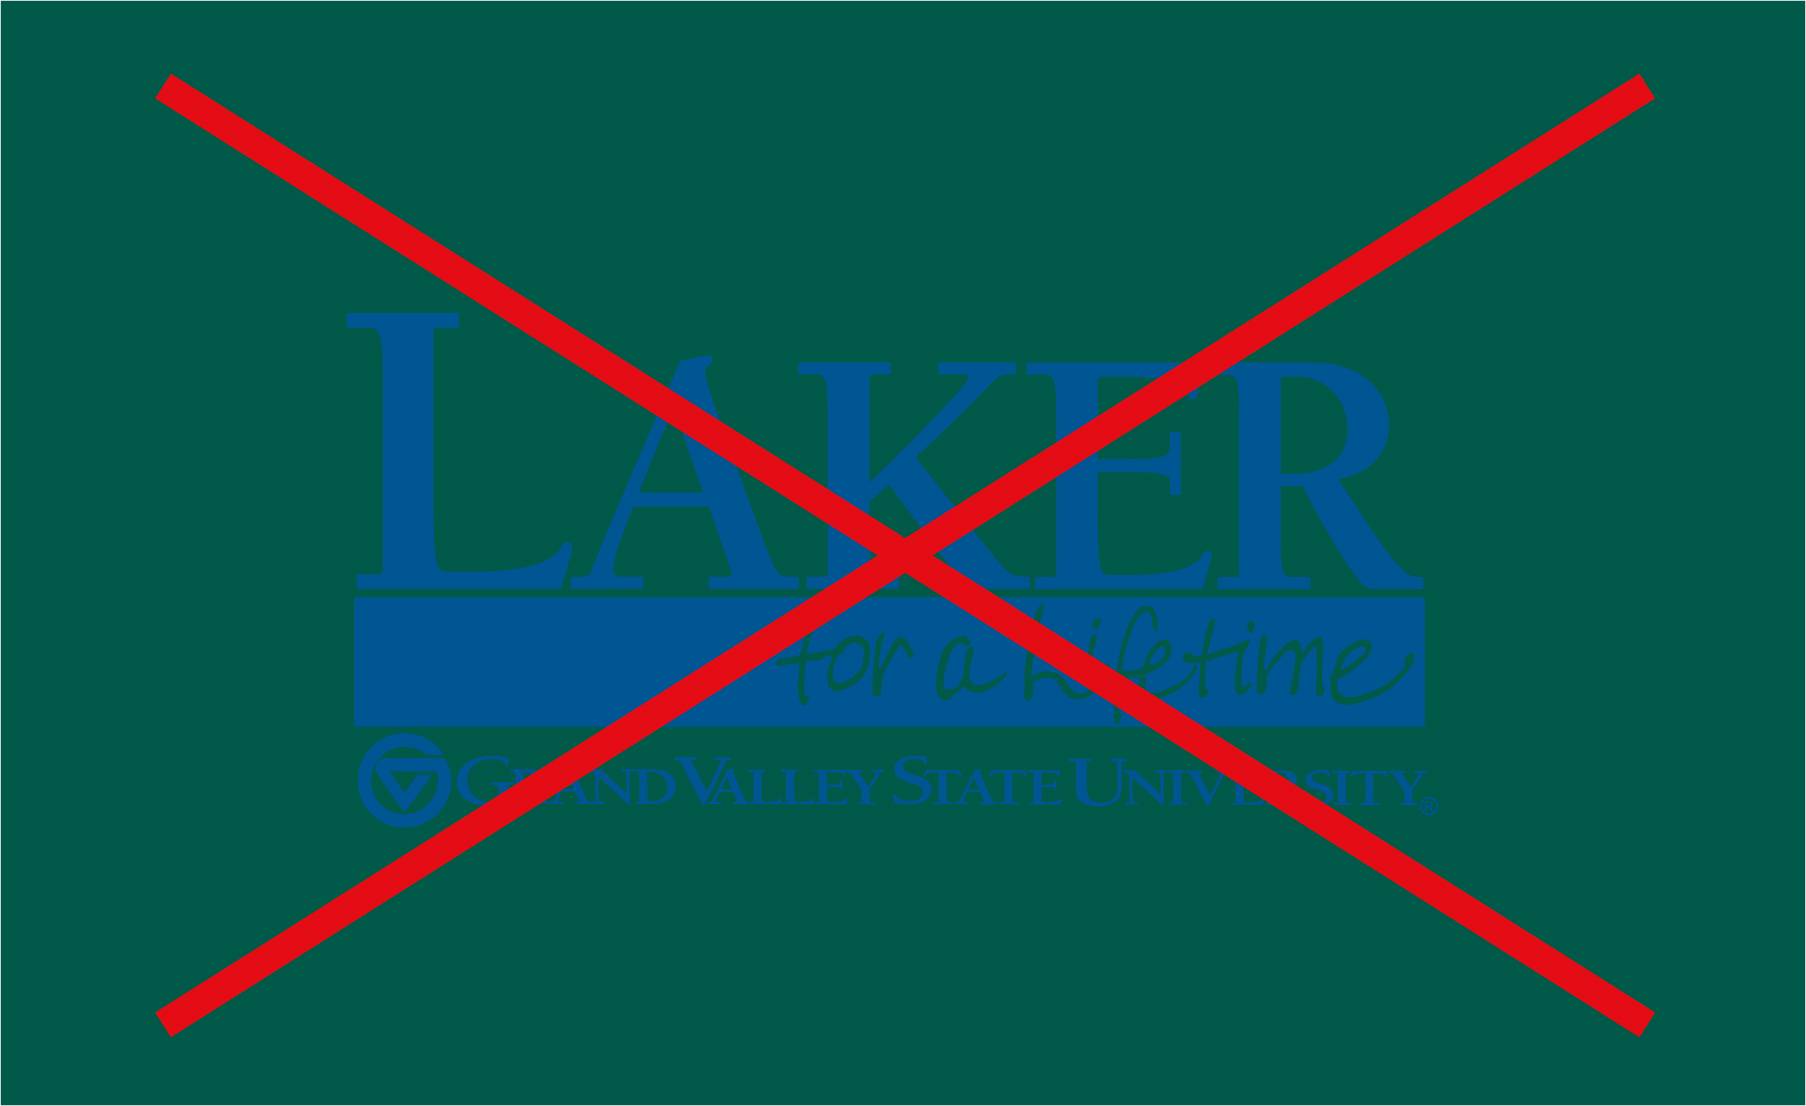 A dark blue Laker for a Lifetime text treatment on a dark green background. The background is minimally lighter than the text, making it difficult to read. A red X overlays it.